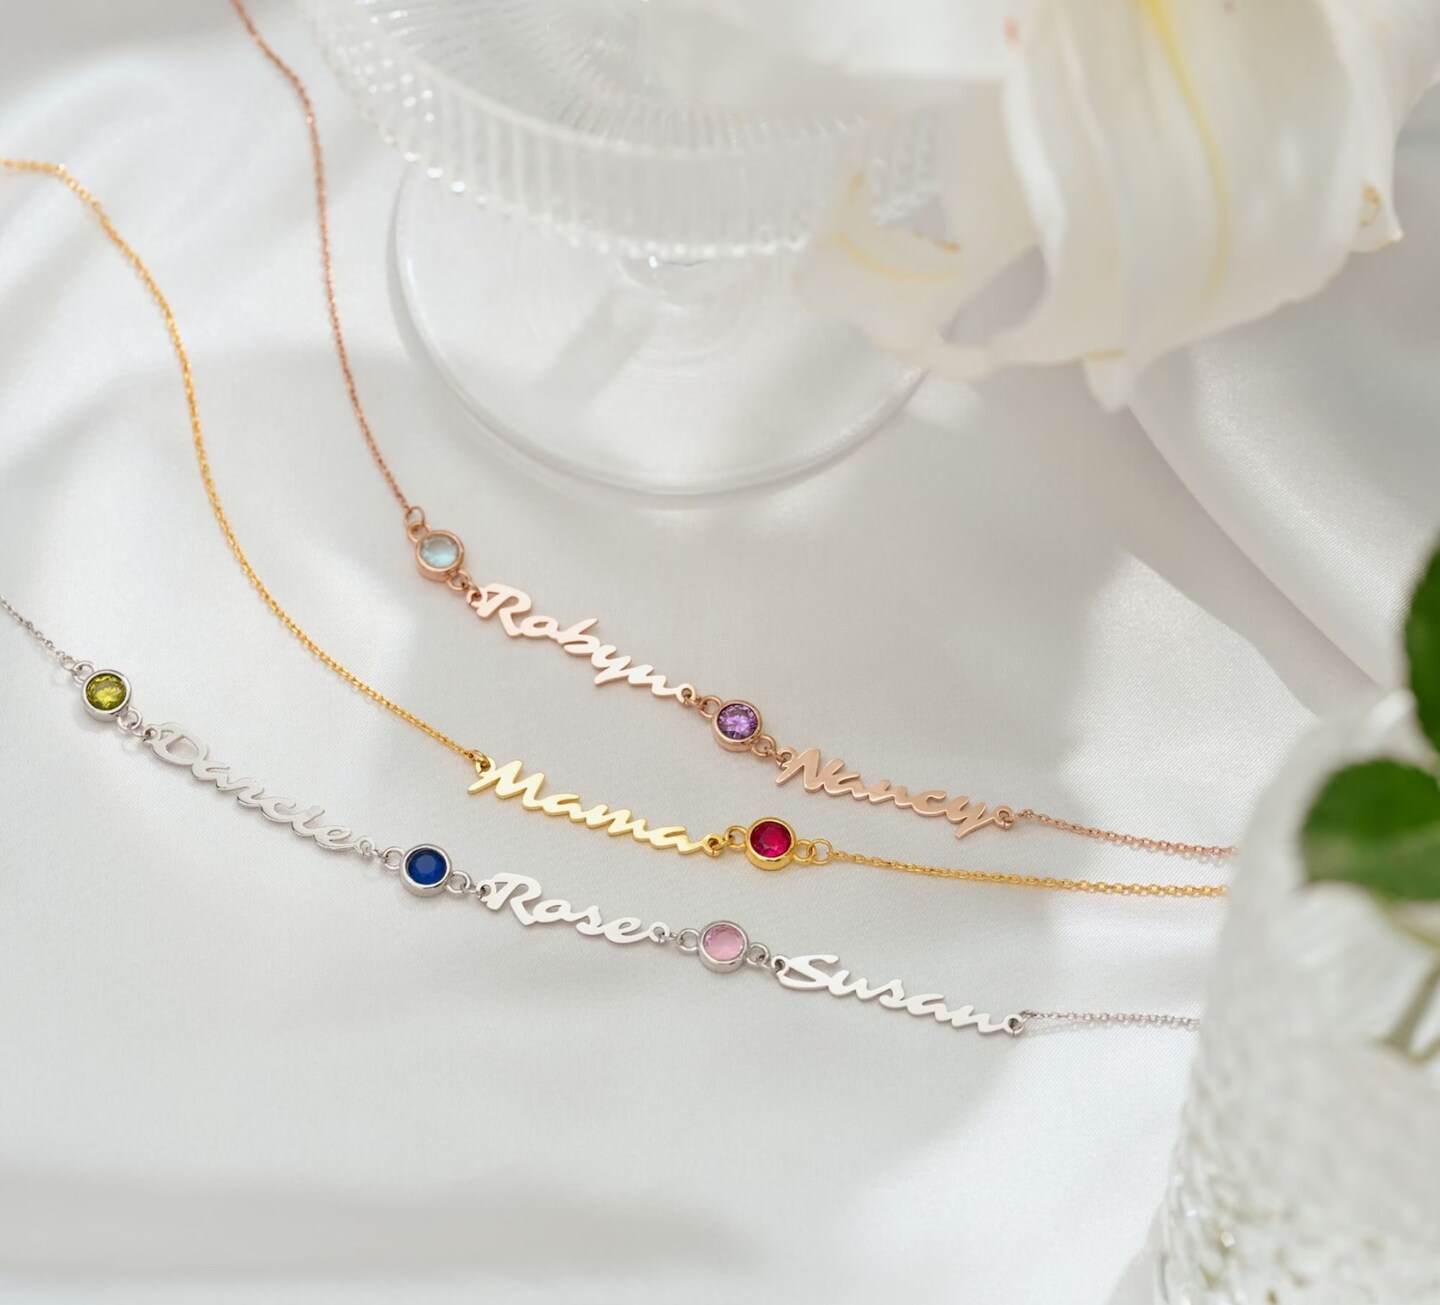 Angelheart Birthstone Necklace in gold, white gold, and silver